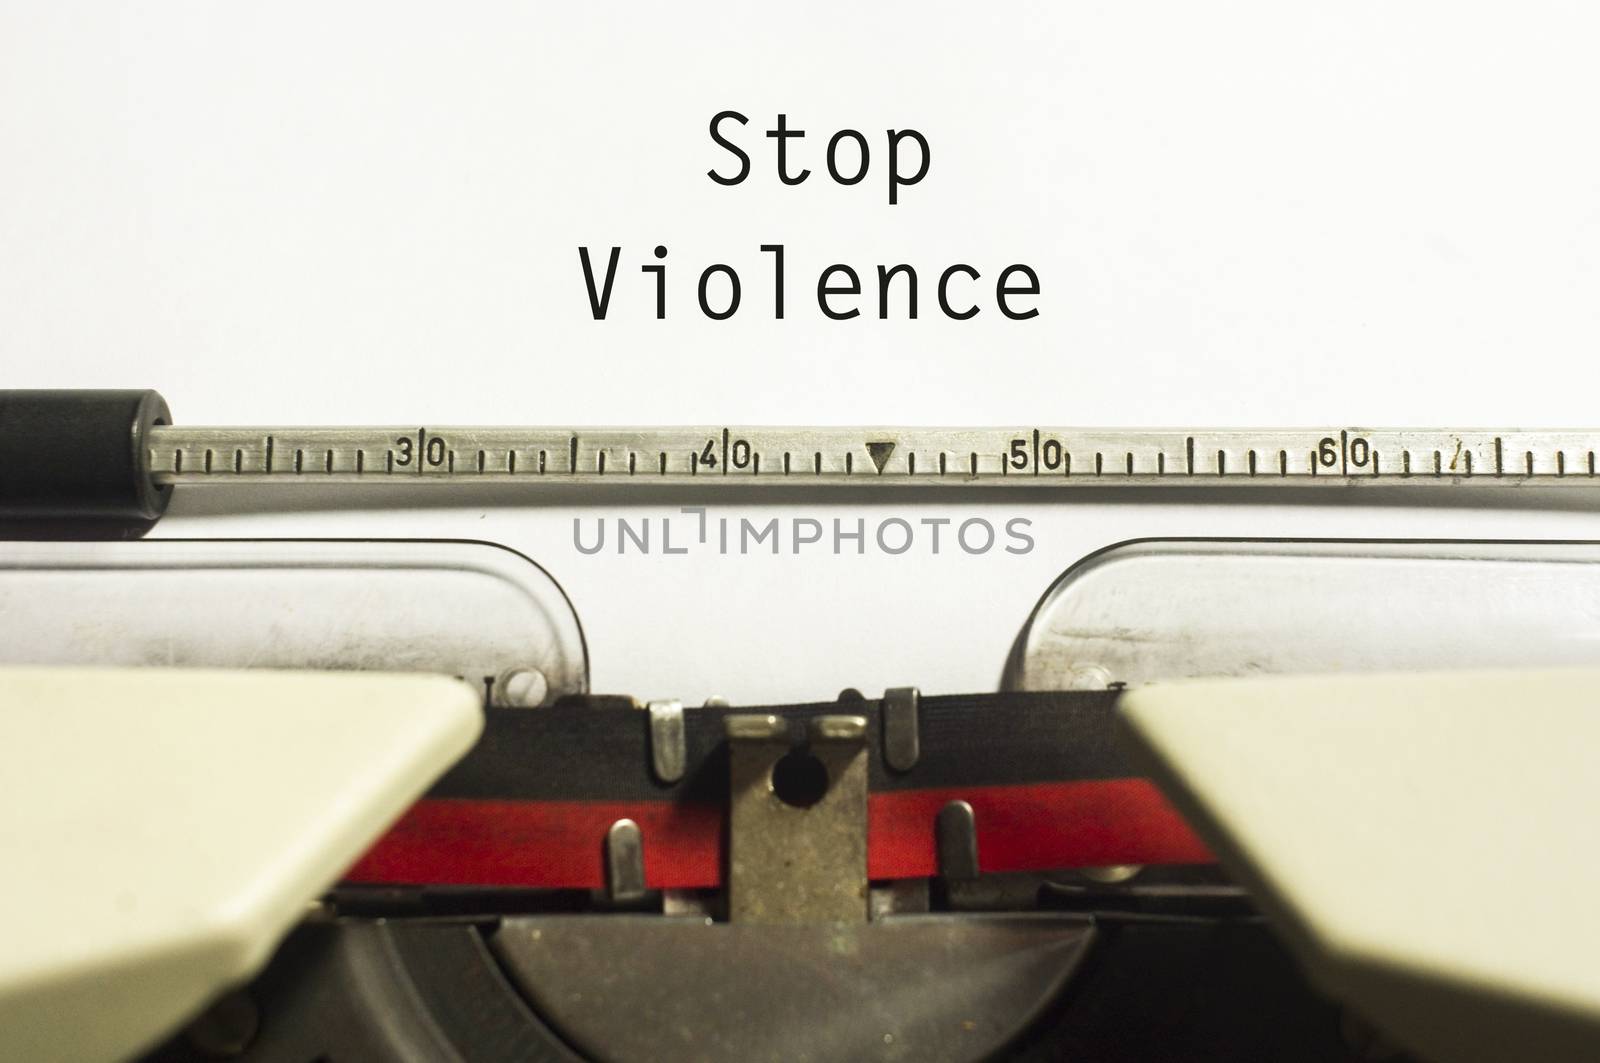 stop violence concept, with message on typewriter paper.